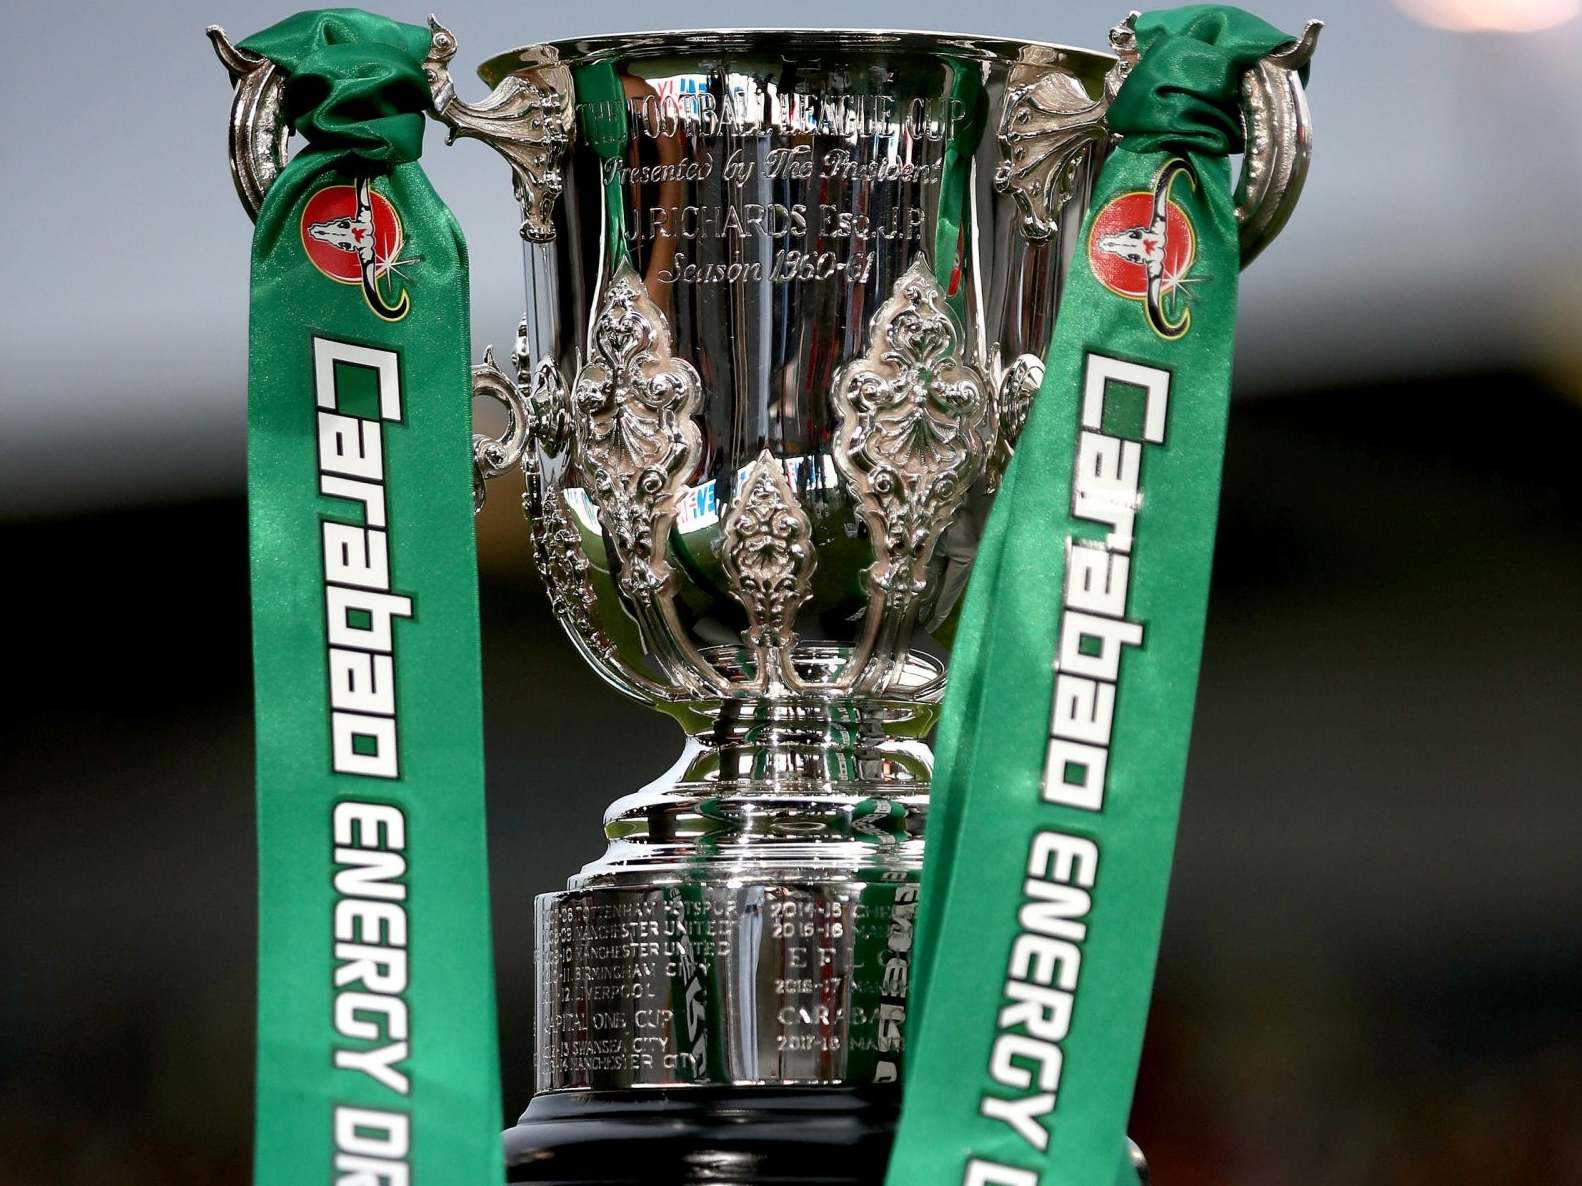 The first round of the Carabao Cup pits Norwich City against Luton Town